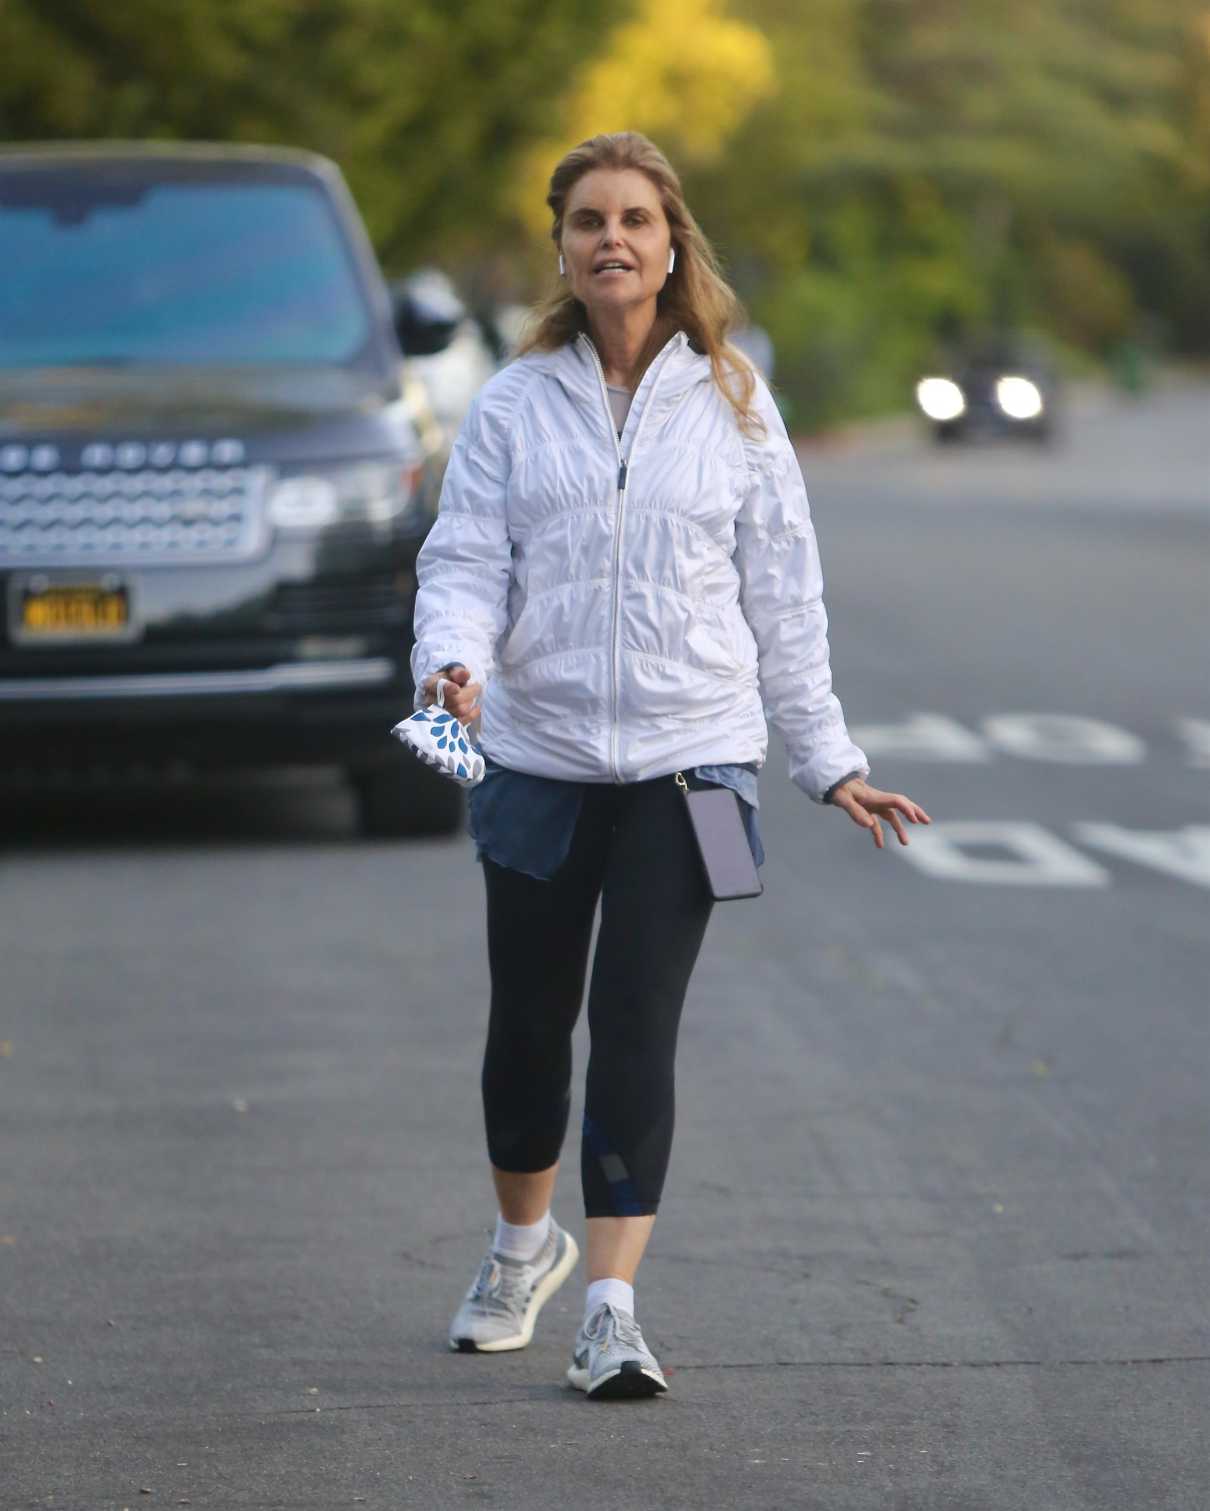 Maria Shriver in a White Jacket